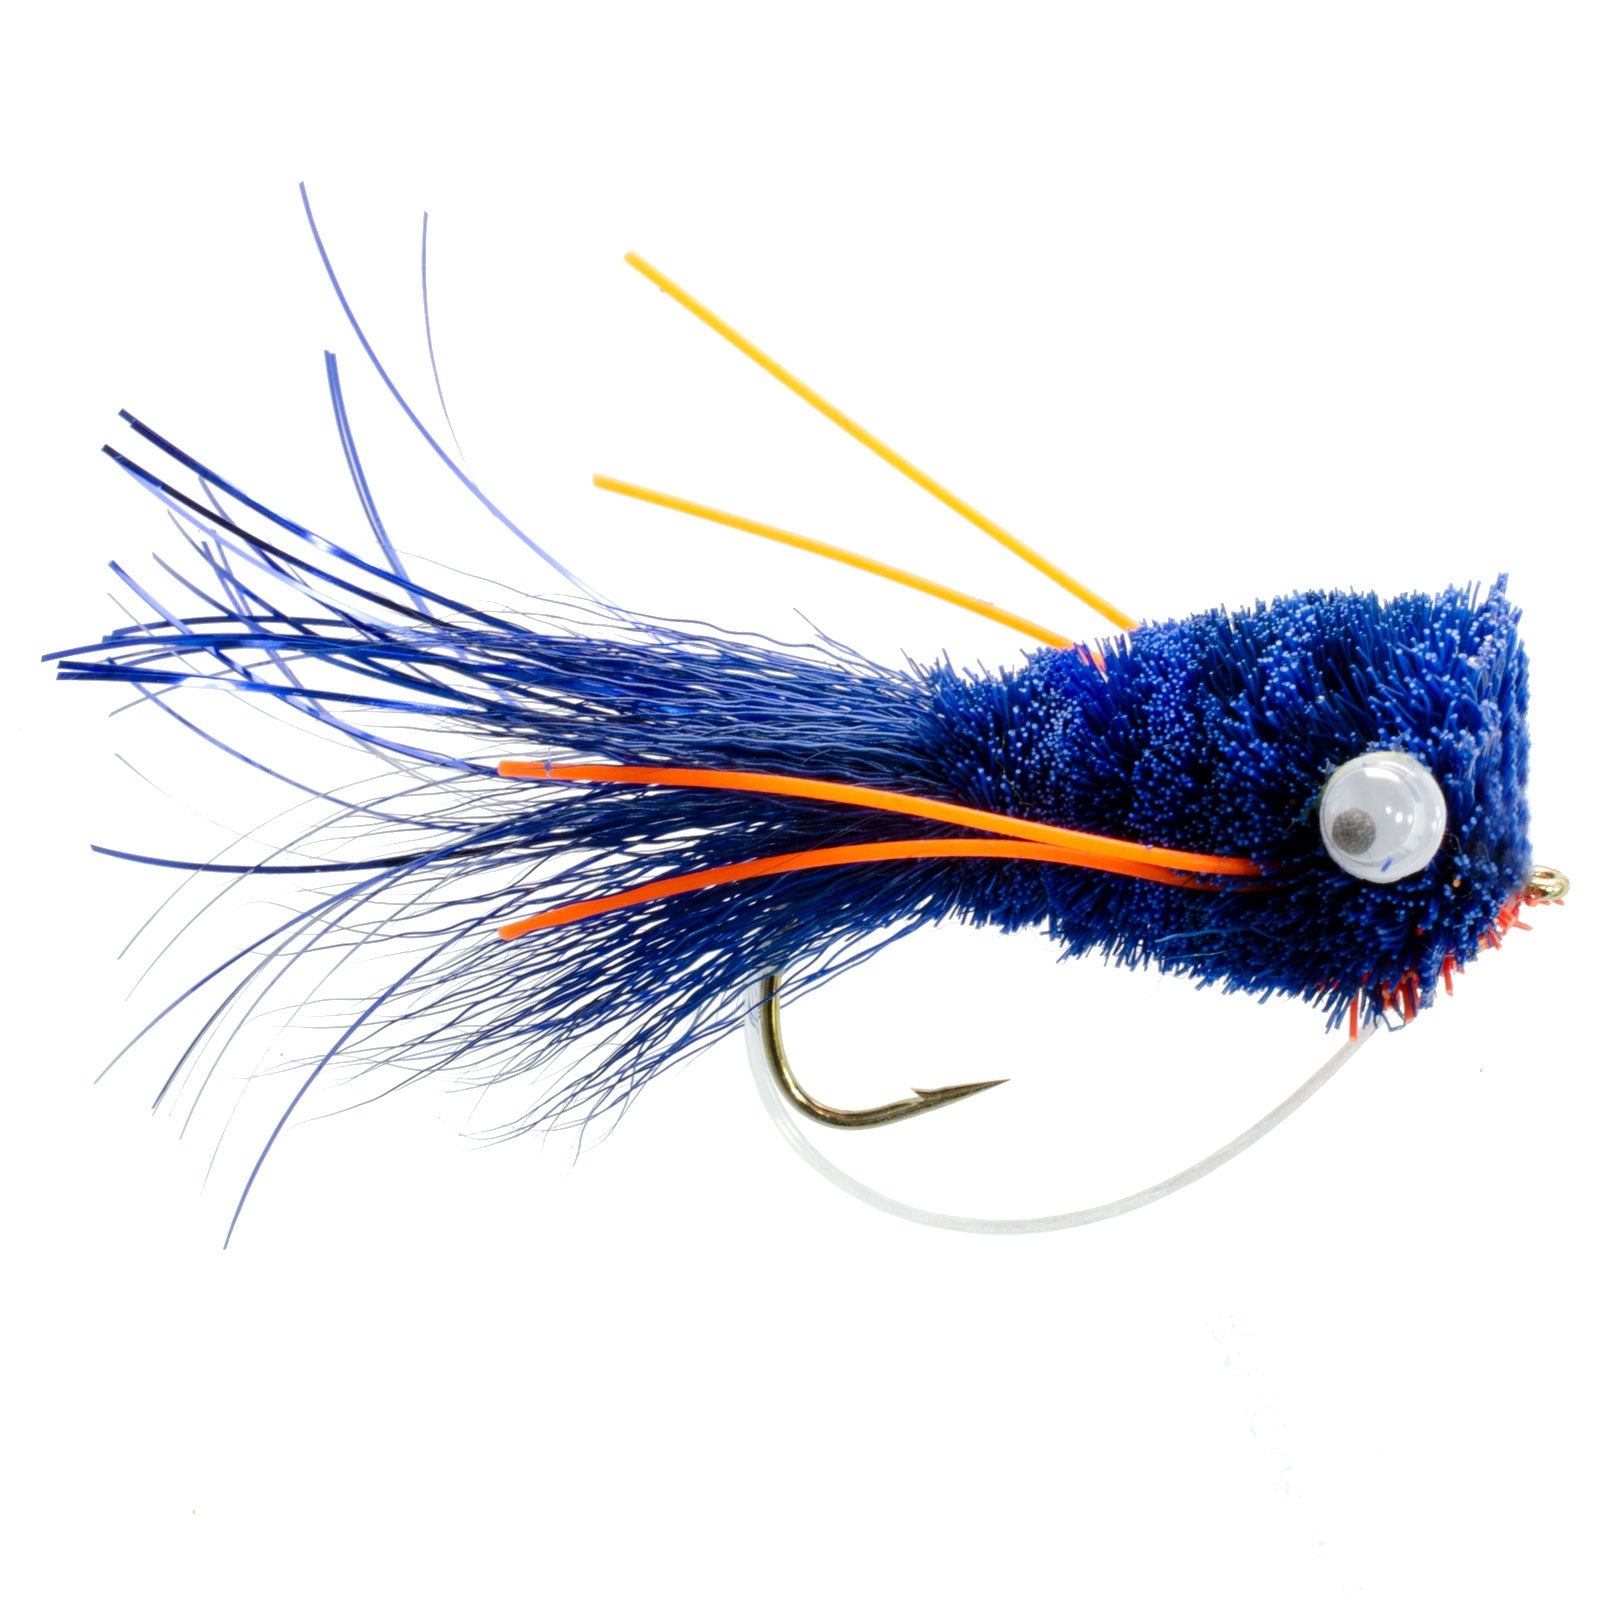 Flashtail Bass Popper Size 6 - Blue Orange Bass Fly Fishing Bug Wide Gape Bass Hooks With Weed Guard